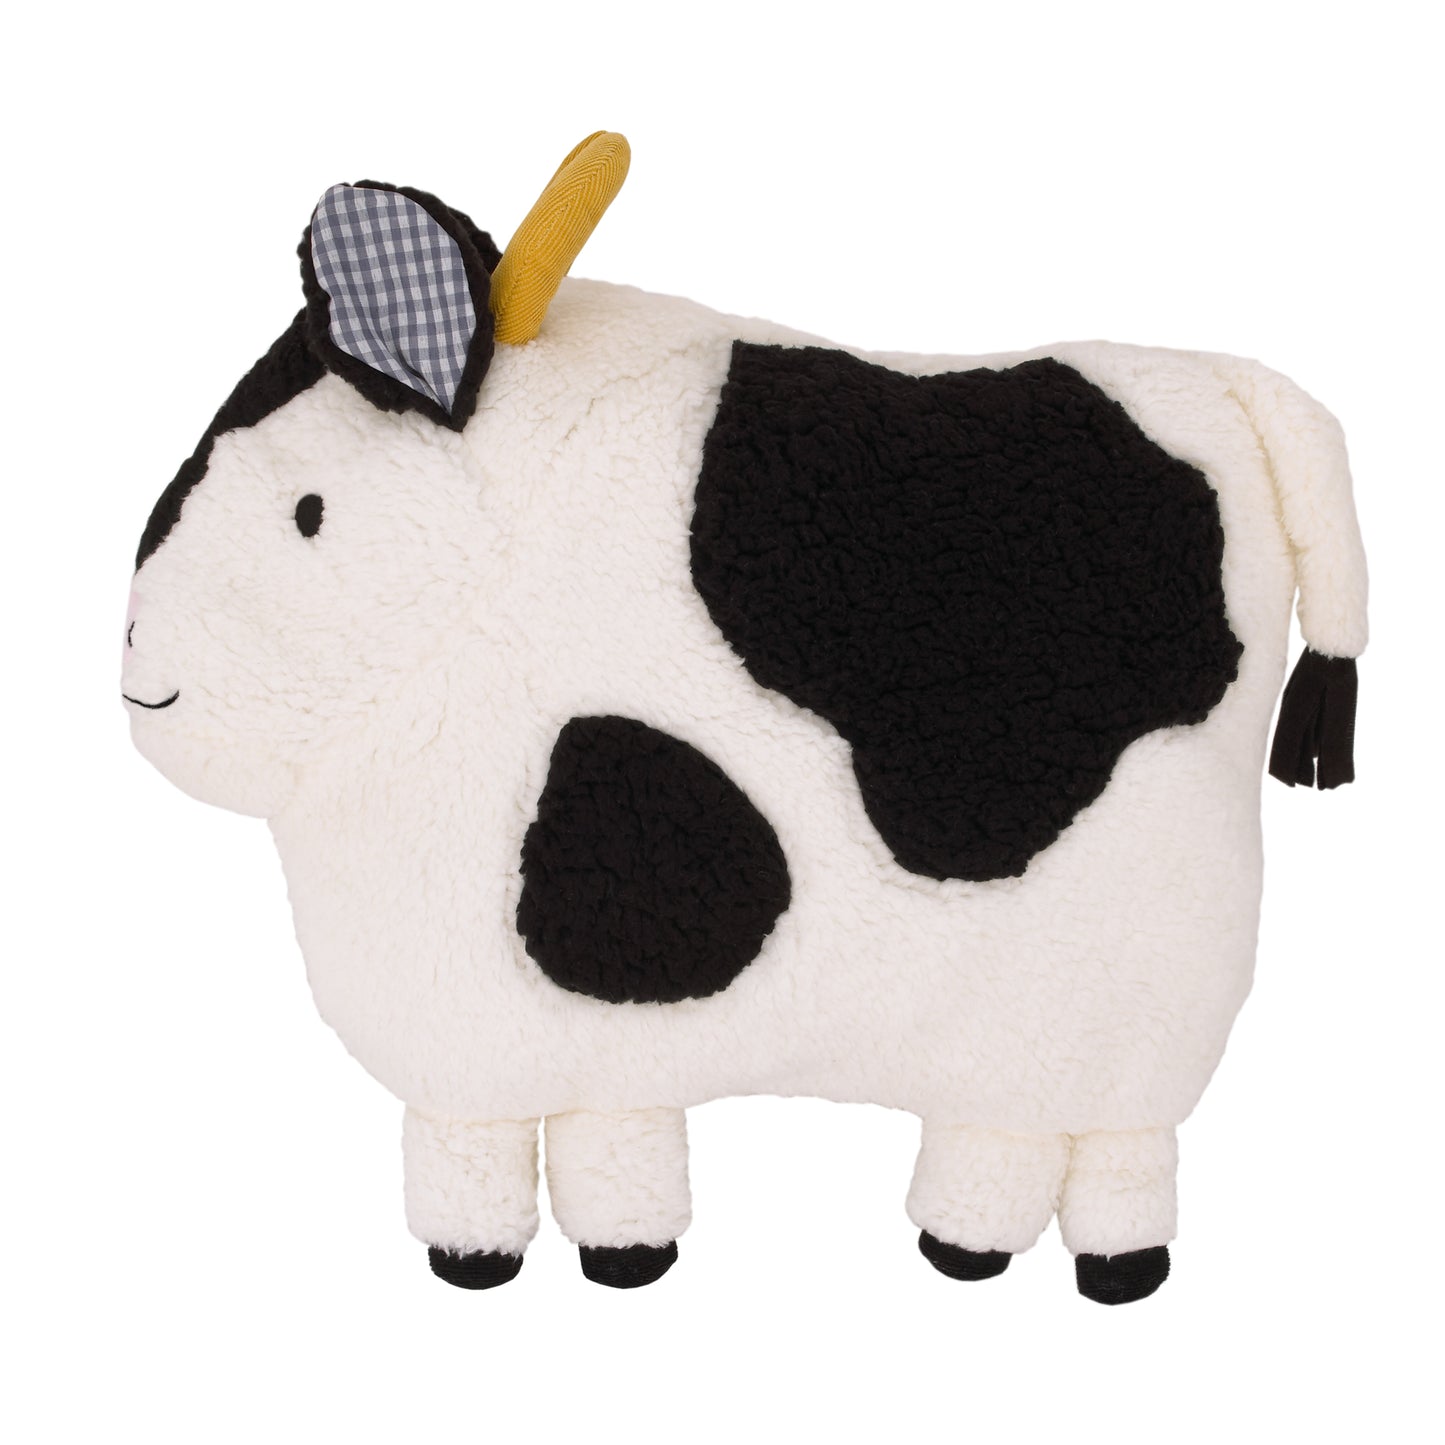 Little Love by NoJo Plush Sherpa Black and White Cow Decorative Throw Pillow with 3D Ears and Dimensional Horns